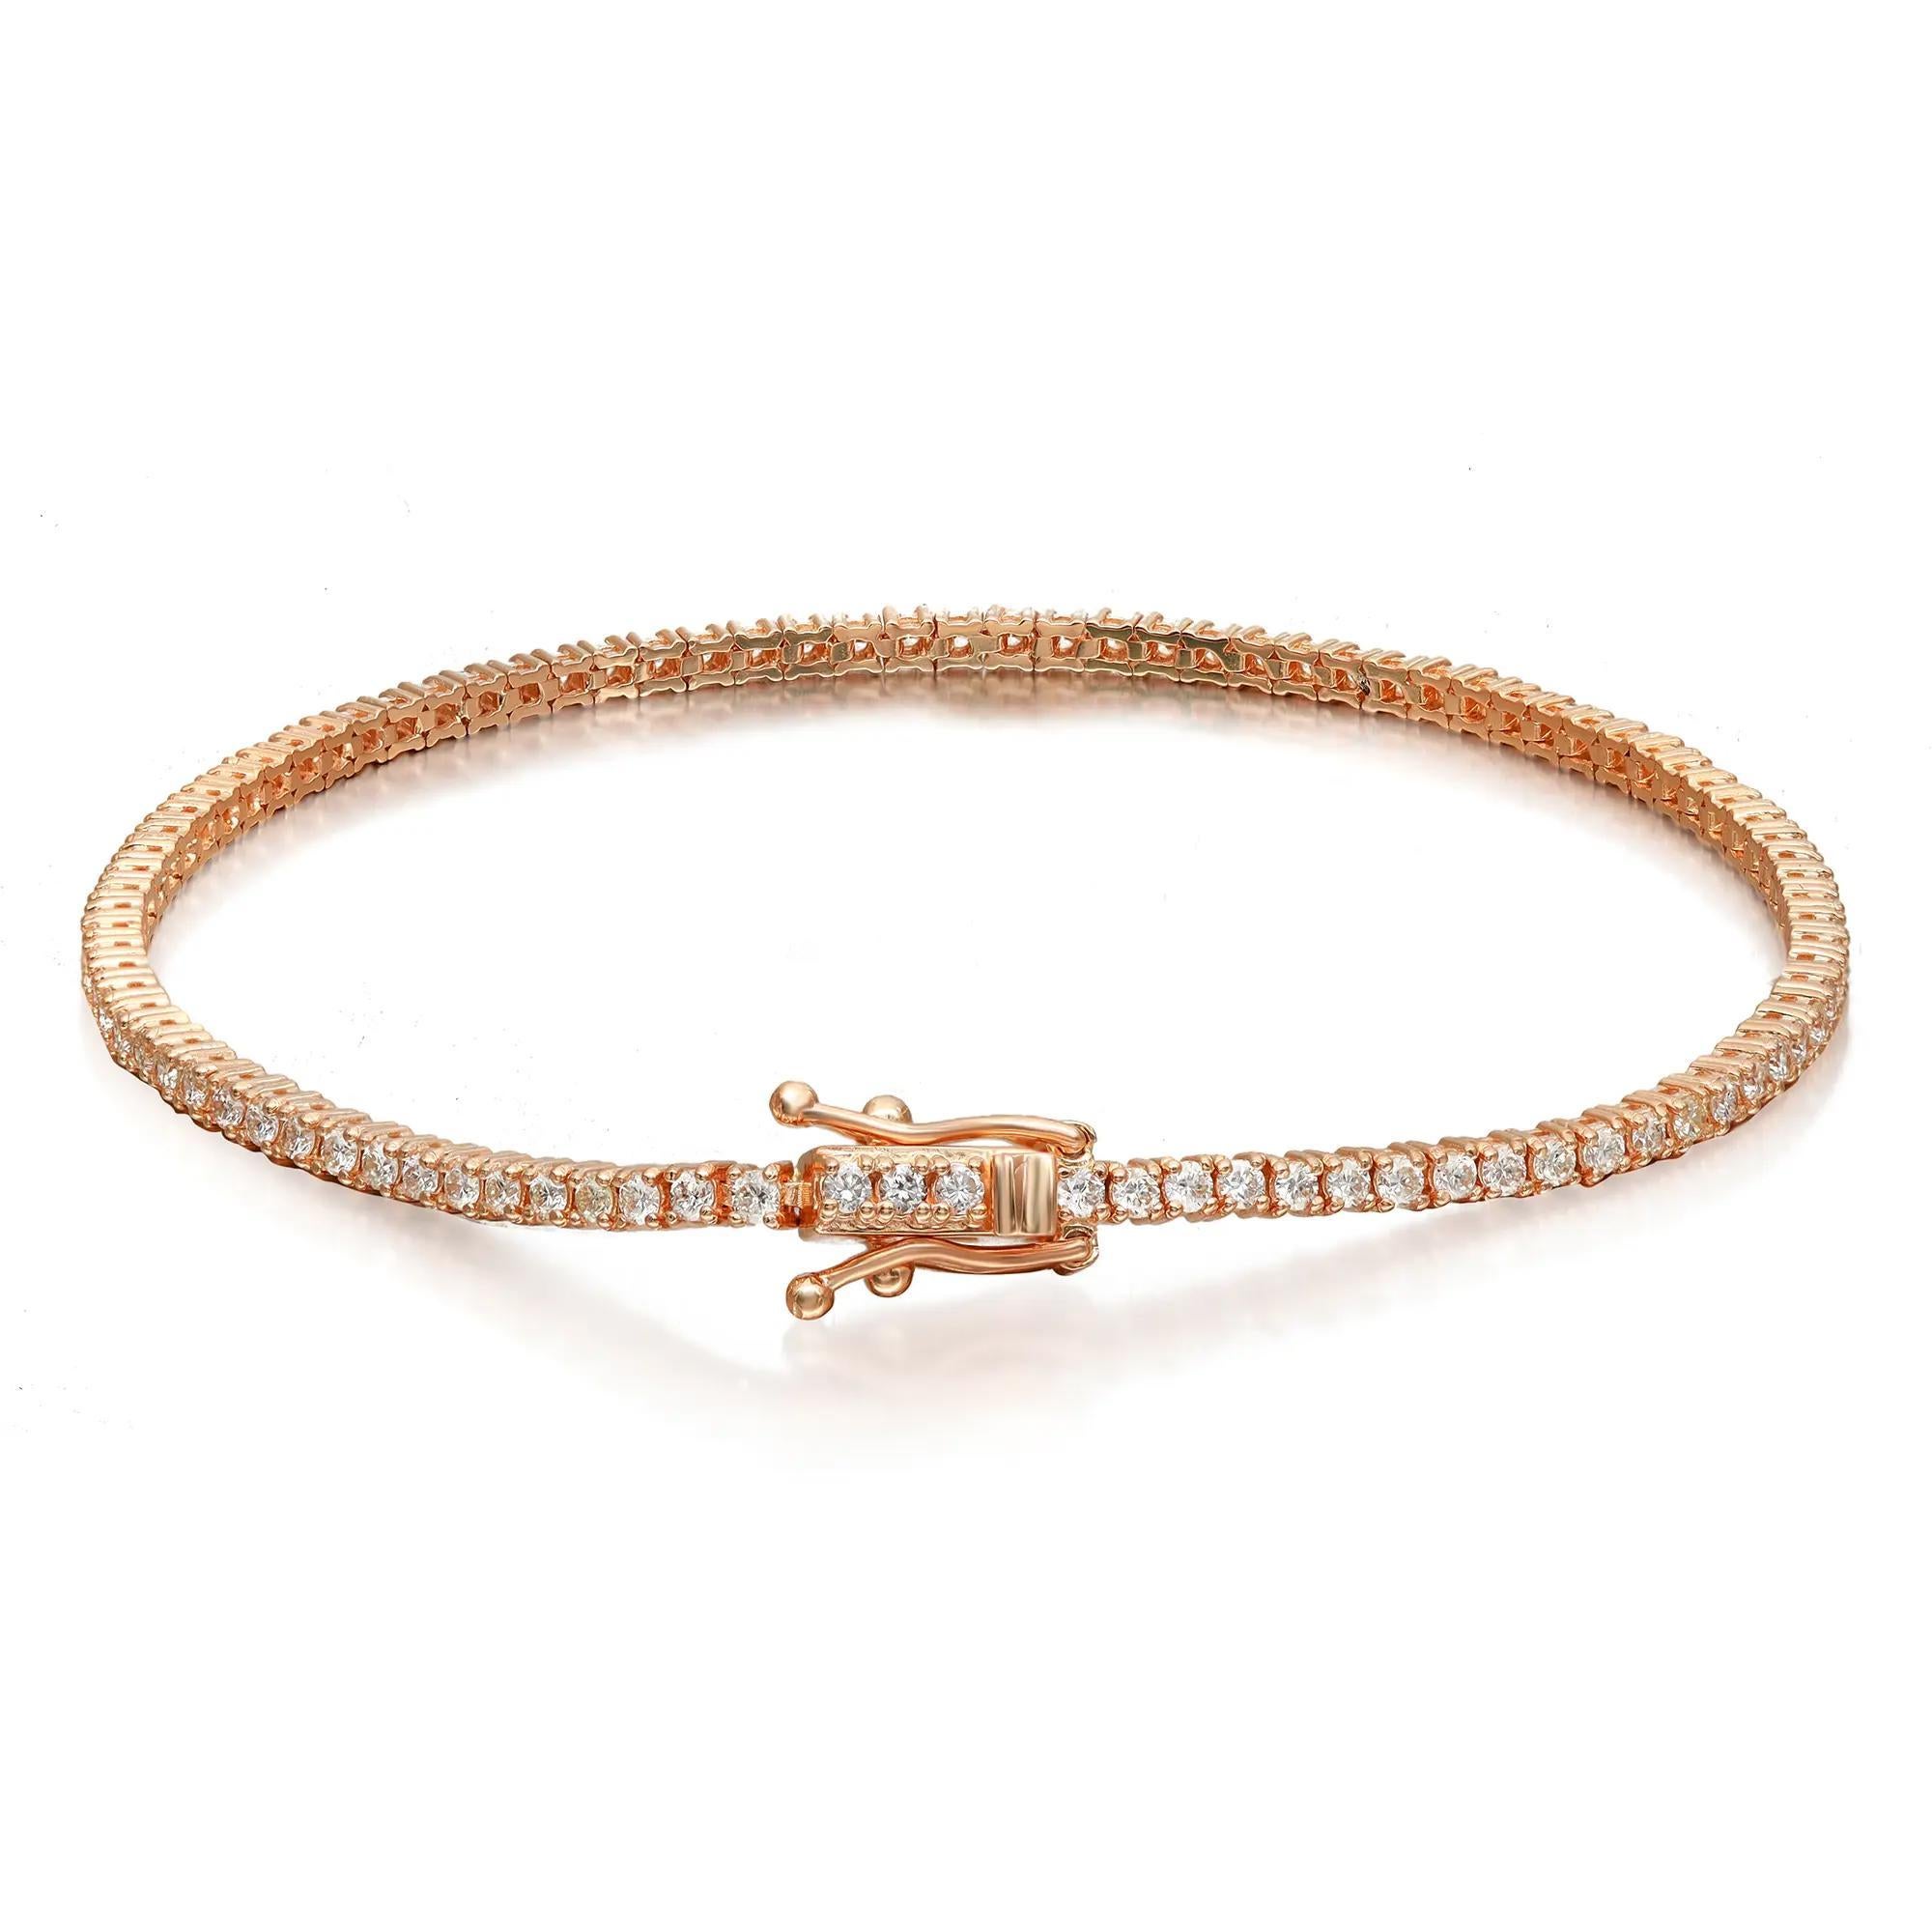 Round Cut Prong Set Round Diamond Tennis Bracelet 14K Rose Gold 0.95Cttw 7 Inches For Sale